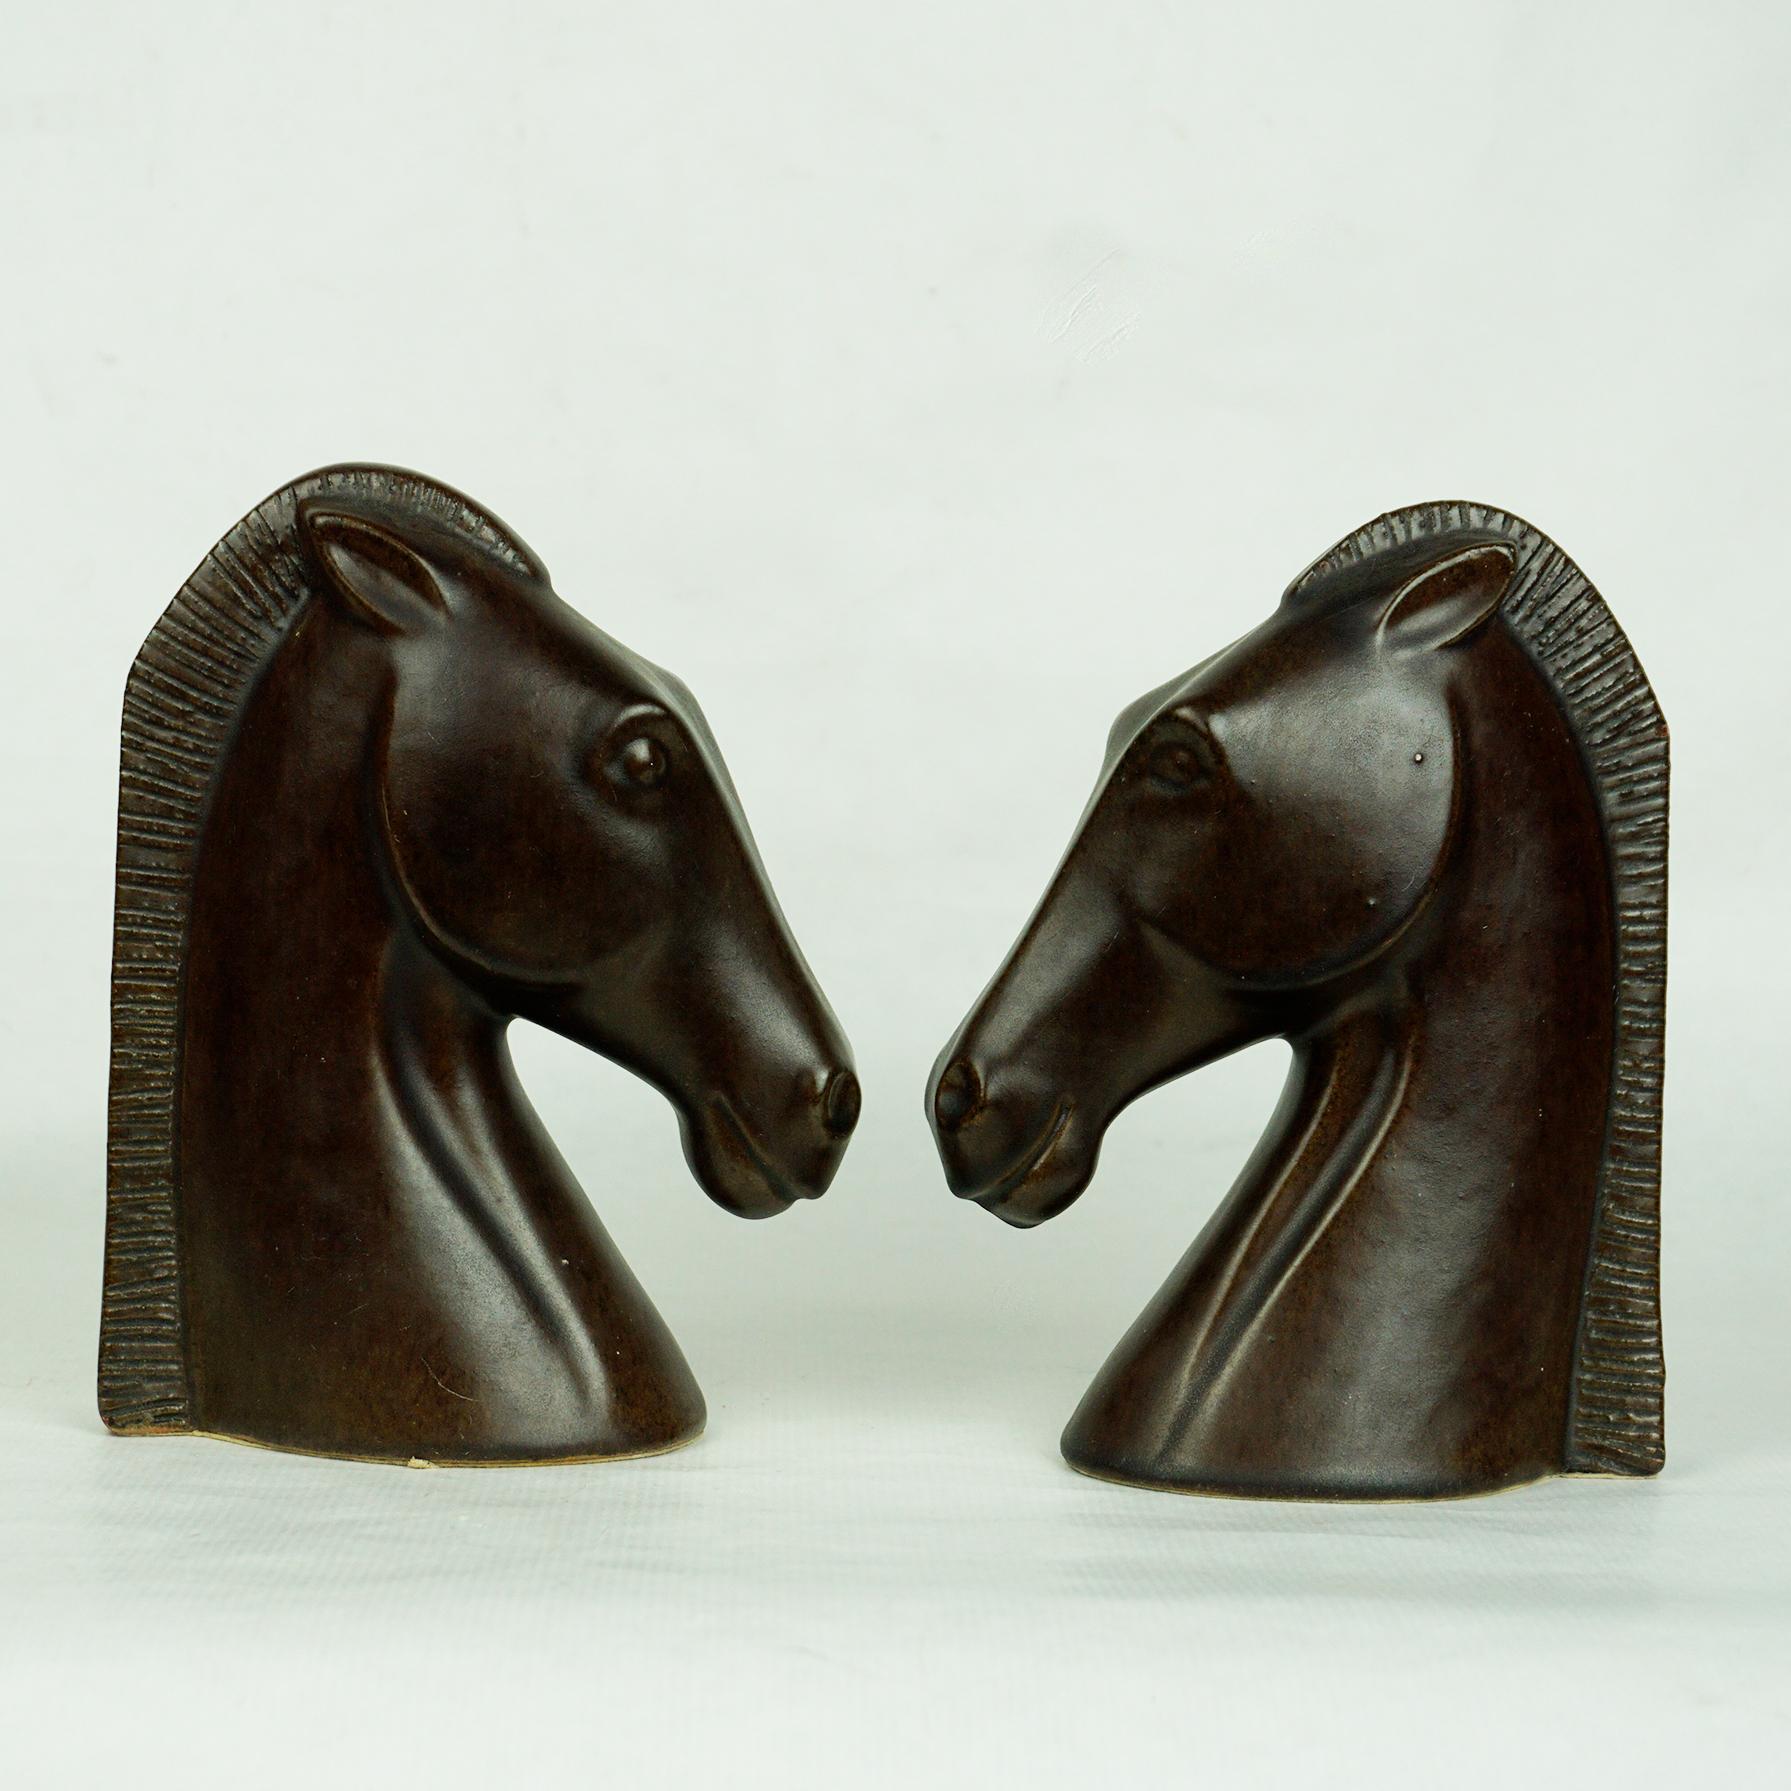 Pair of Austrian Midcentury Brown Glazed Ceramic Horse Book Ends by Anzengruber 3